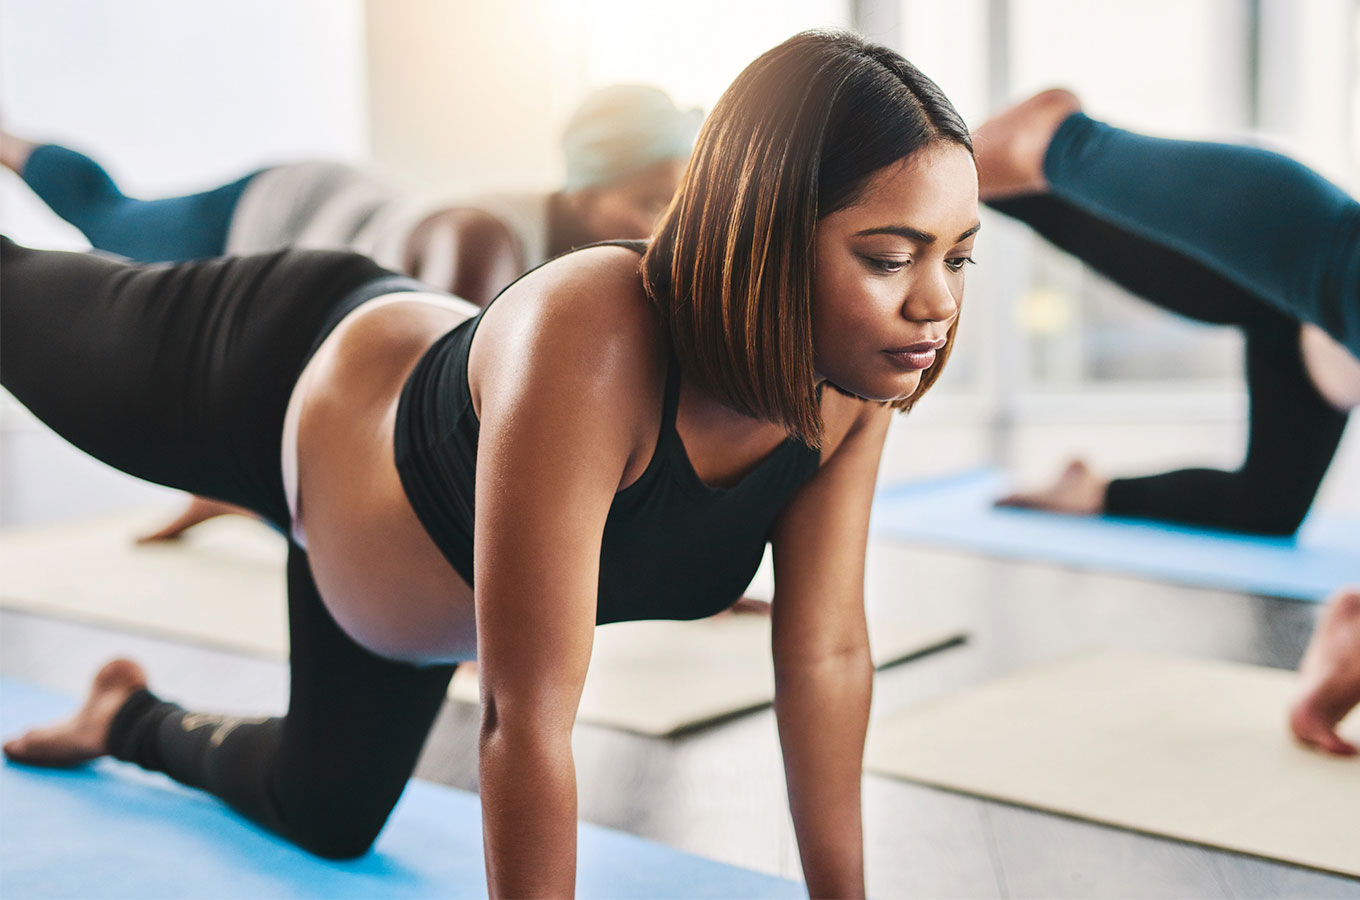 A young Black pregnant woman does exercises on a yoga mat along with other women